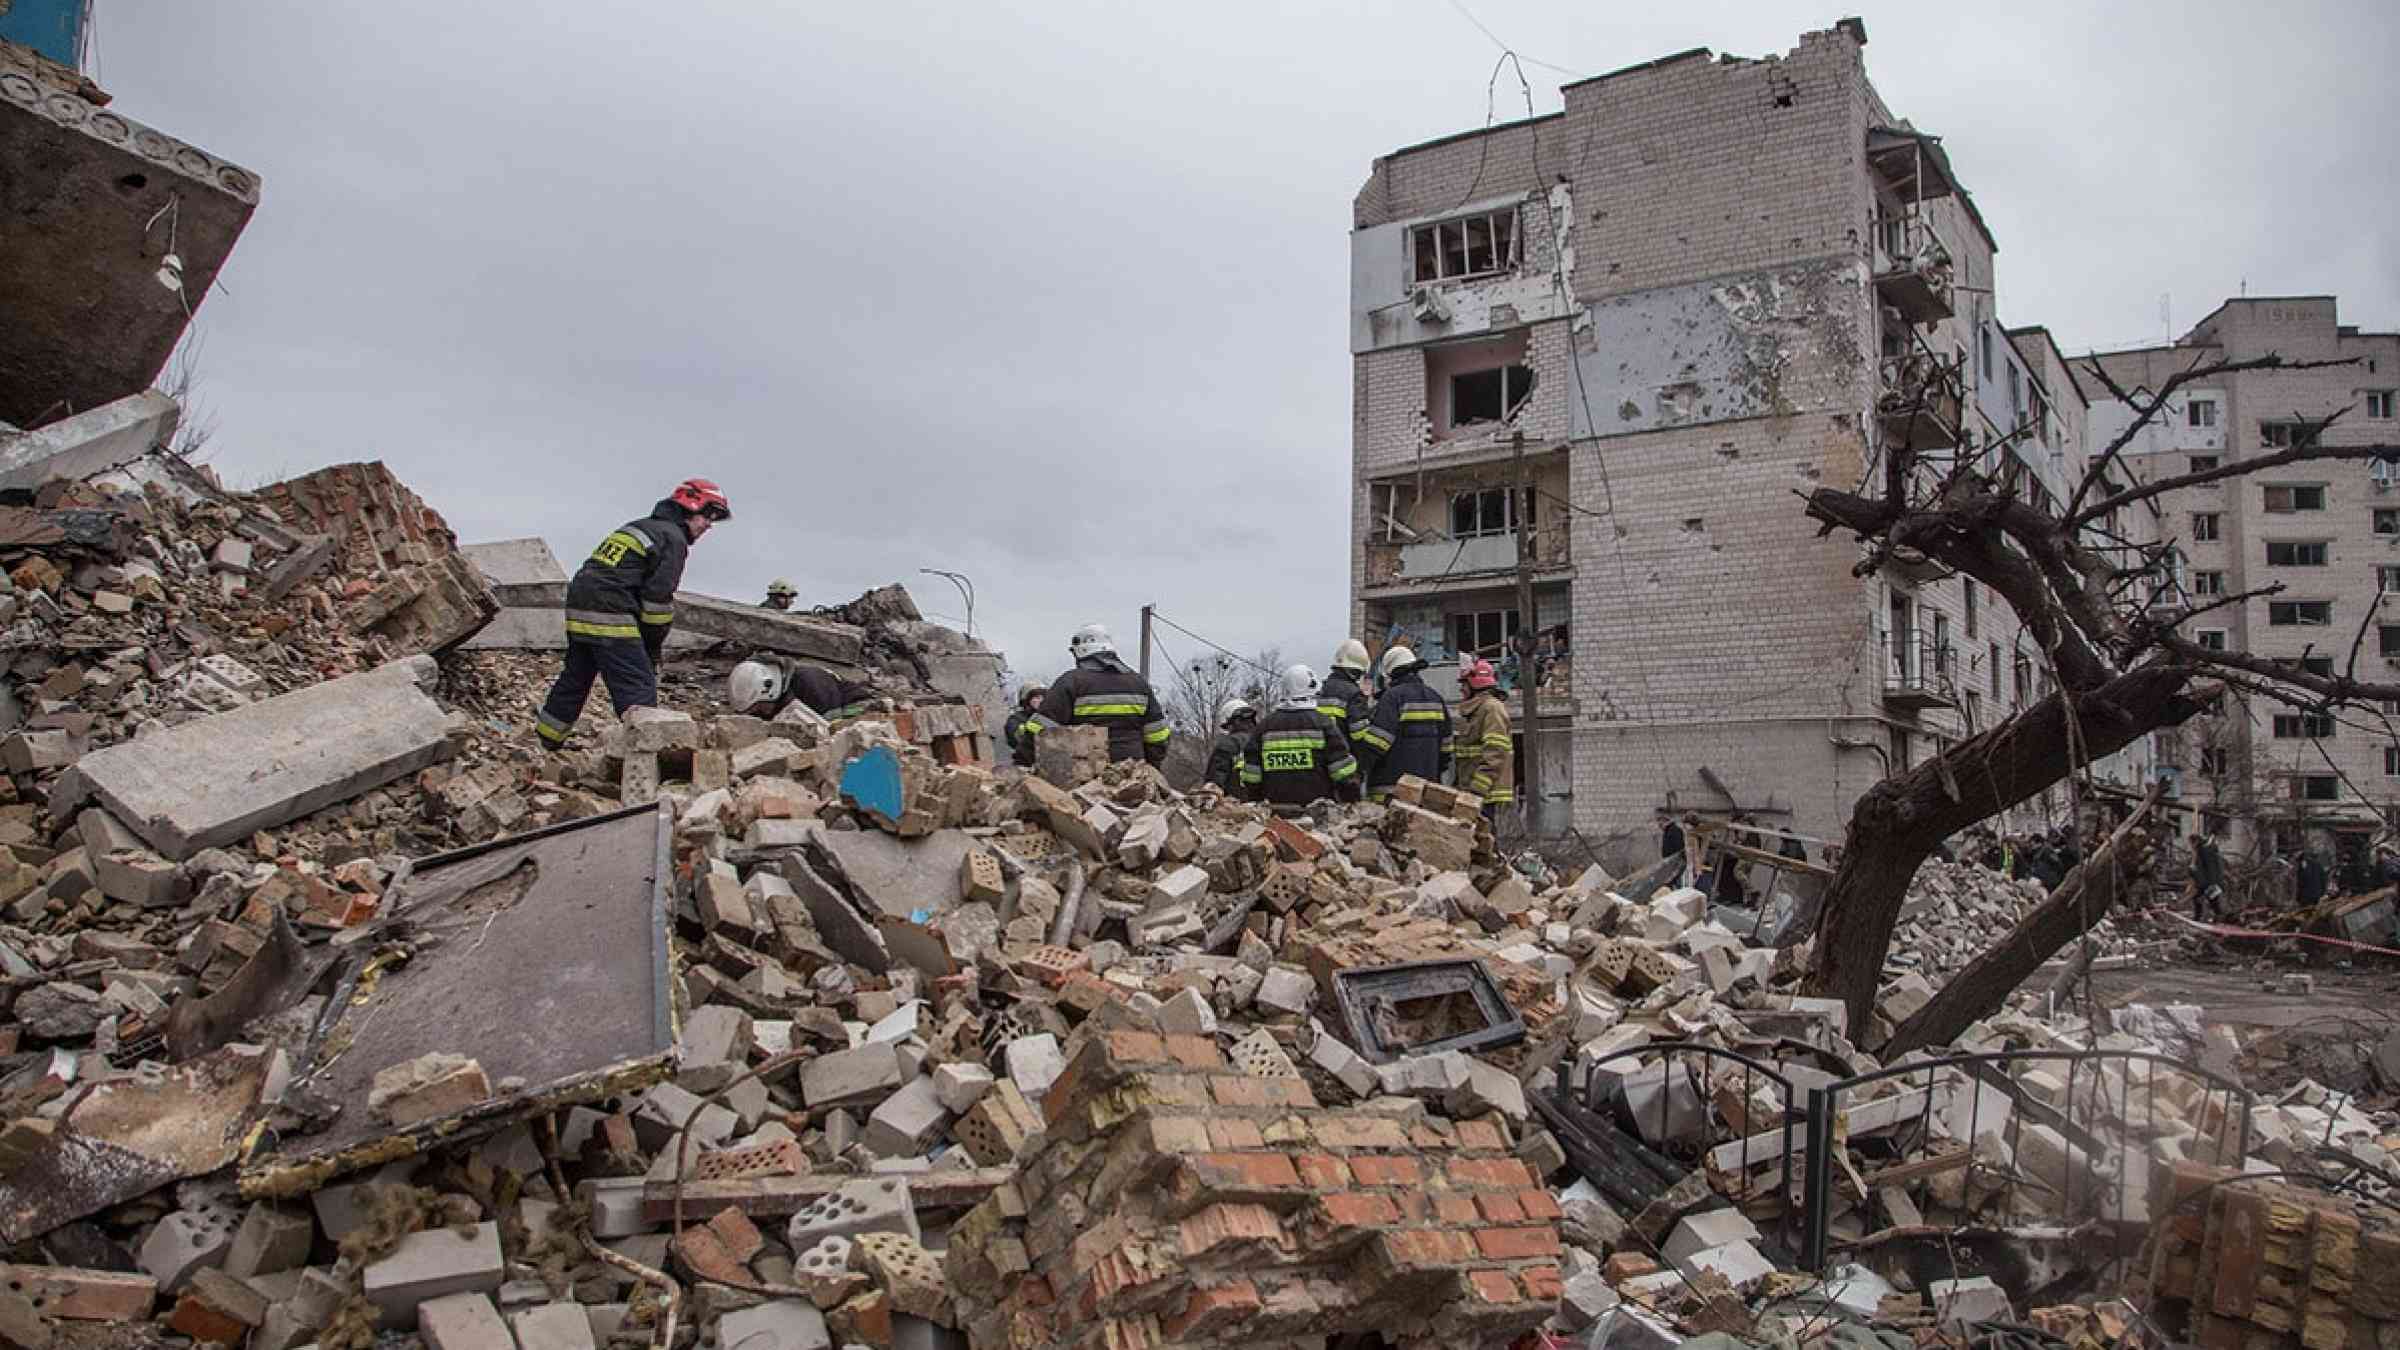 Ukraine - rubble in a bombed residential area